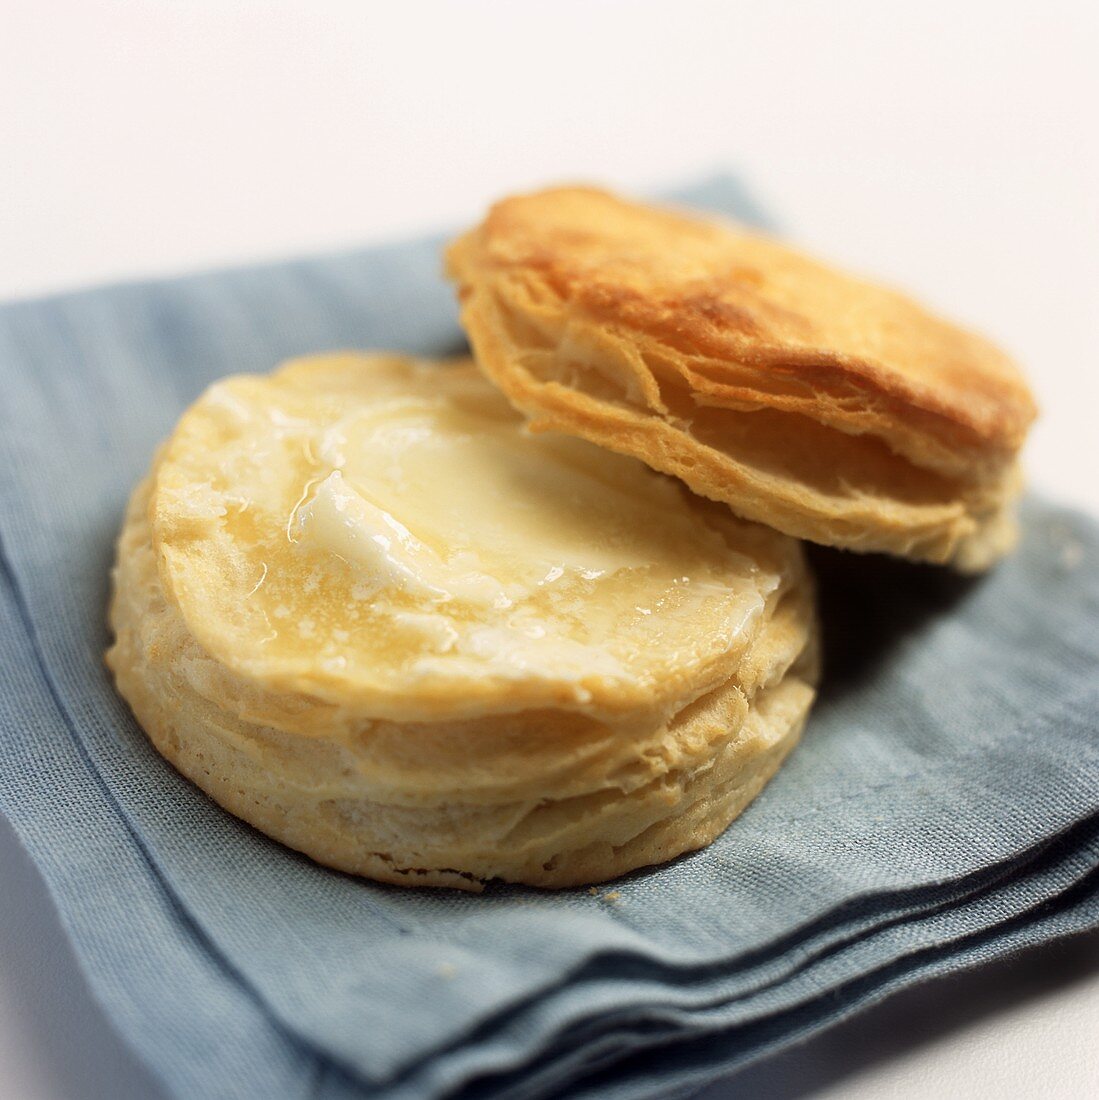 A Flaky Buttermilk Biscuit with Melting Butter